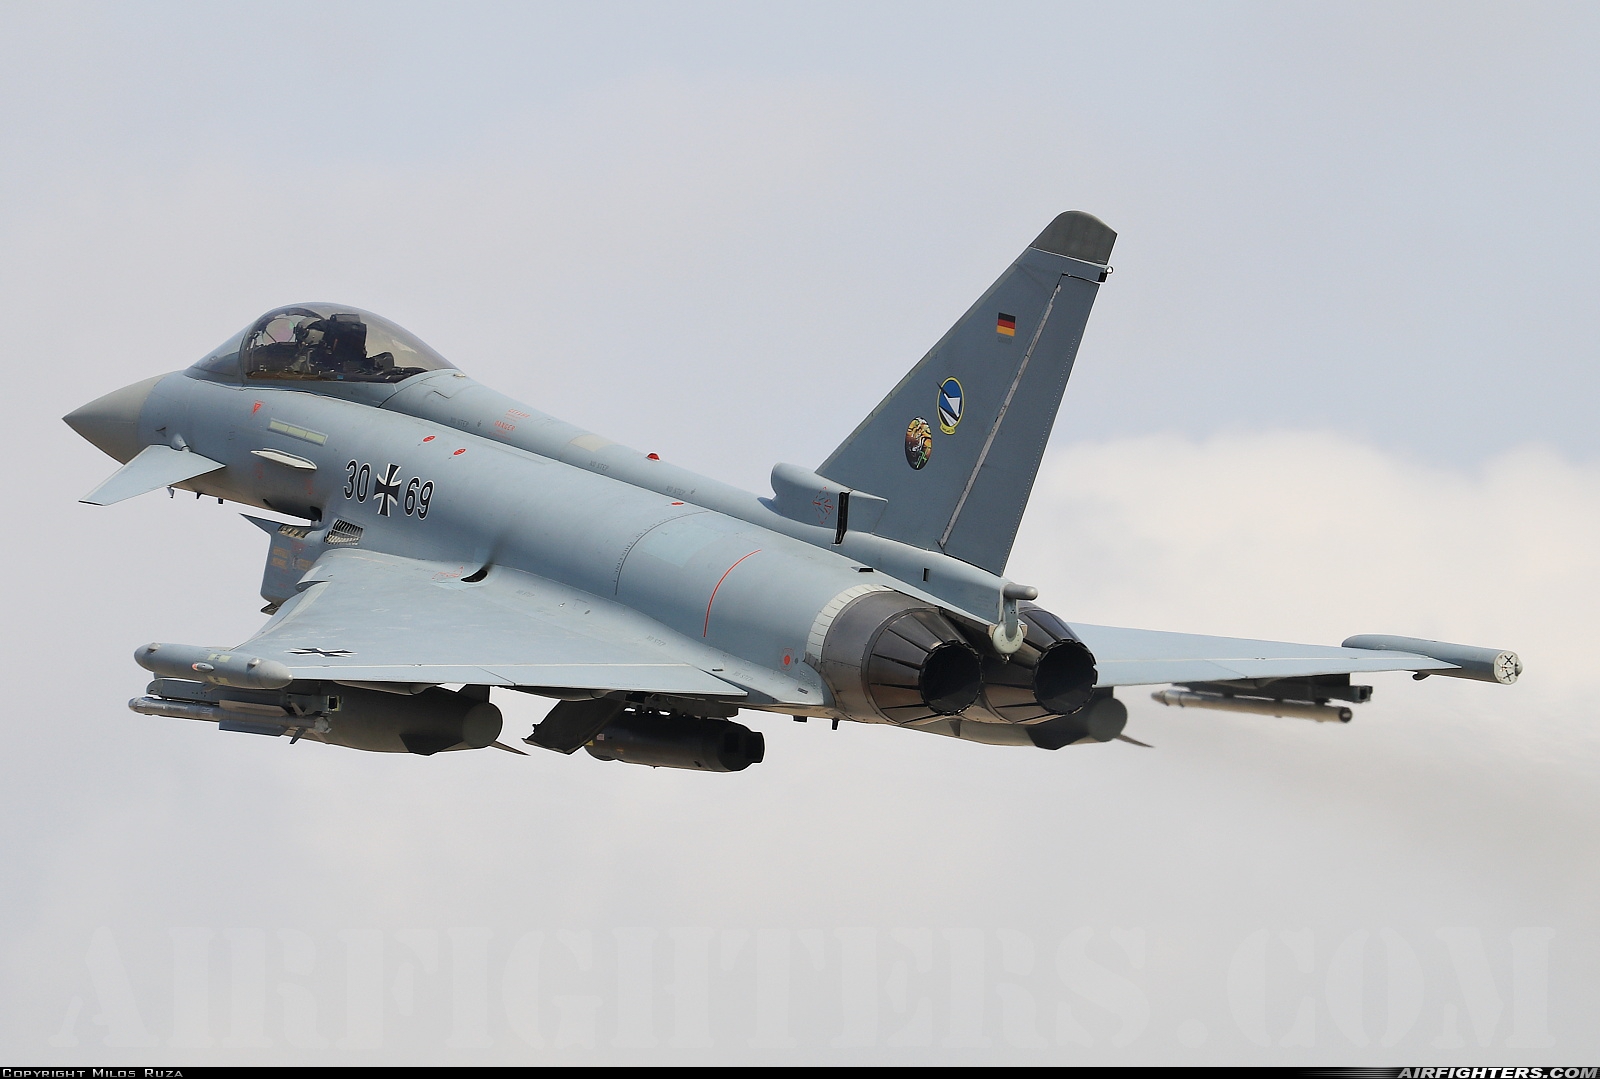 Germany - Air Force Eurofighter EF-2000 Typhoon S 30+69 at Gioia del Colle-Bari (LIBV), Italy